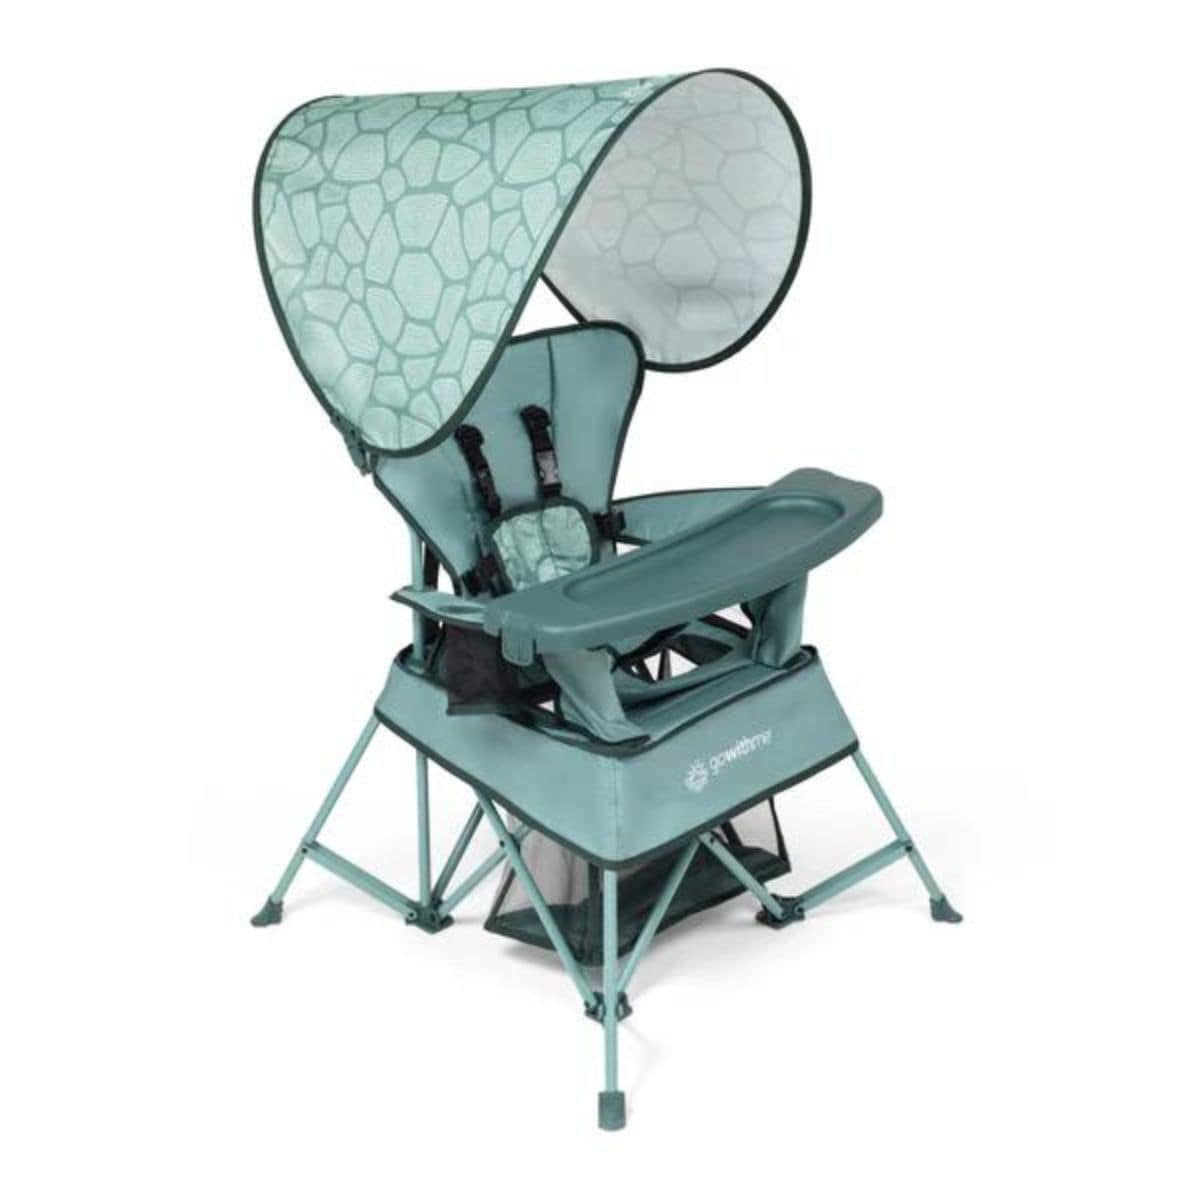 Go With Me Venture Deluxe Portable Chair, 819956001586 - ANB Baby